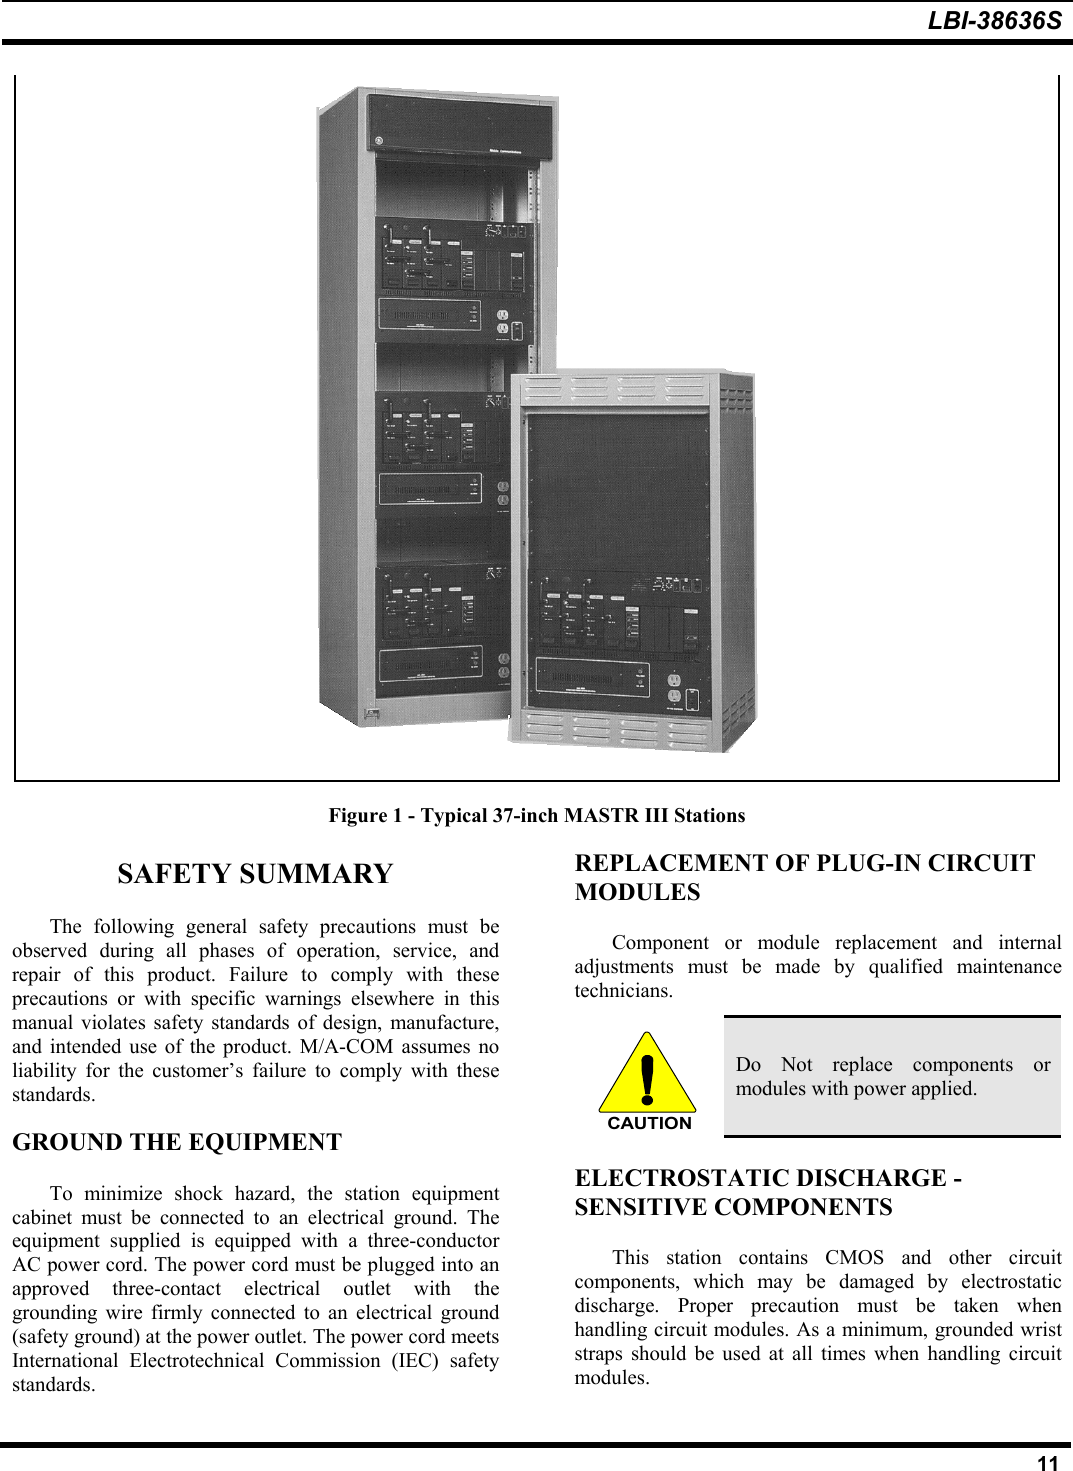 LBI-38636S11Figure 1 - Typical 37-inch MASTR III StationsSAFETY SUMMARYThe following general safety precautions must beobserved during all phases of operation, service, andrepair of this product. Failure to comply with theseprecautions or with specific warnings elsewhere in thismanual violates safety standards of design, manufacture,and intended use of the product. M/A-COM assumes noliability for the customer’s failure to comply with thesestandards.GROUND THE EQUIPMENTTo minimize shock hazard, the station equipmentcabinet must be connected to an electrical ground. Theequipment supplied is equipped with a three-conductorAC power cord. The power cord must be plugged into anapproved three-contact electrical outlet with thegrounding wire firmly connected to an electrical ground(safety ground) at the power outlet. The power cord meetsInternational Electrotechnical Commission (IEC) safetystandards.REPLACEMENT OF PLUG-IN CIRCUITMODULESComponent or module replacement and internaladjustments must be made by qualified maintenancetechnicians.CAUTIONDo Not replace components ormodules with power applied.ELECTROSTATIC DISCHARGE -SENSITIVE COMPONENTSThis station contains CMOS and other circuitcomponents, which may be damaged by electrostaticdischarge. Proper precaution must be taken whenhandling circuit modules. As a minimum, grounded wriststraps should be used at all times when handling circuitmodules.